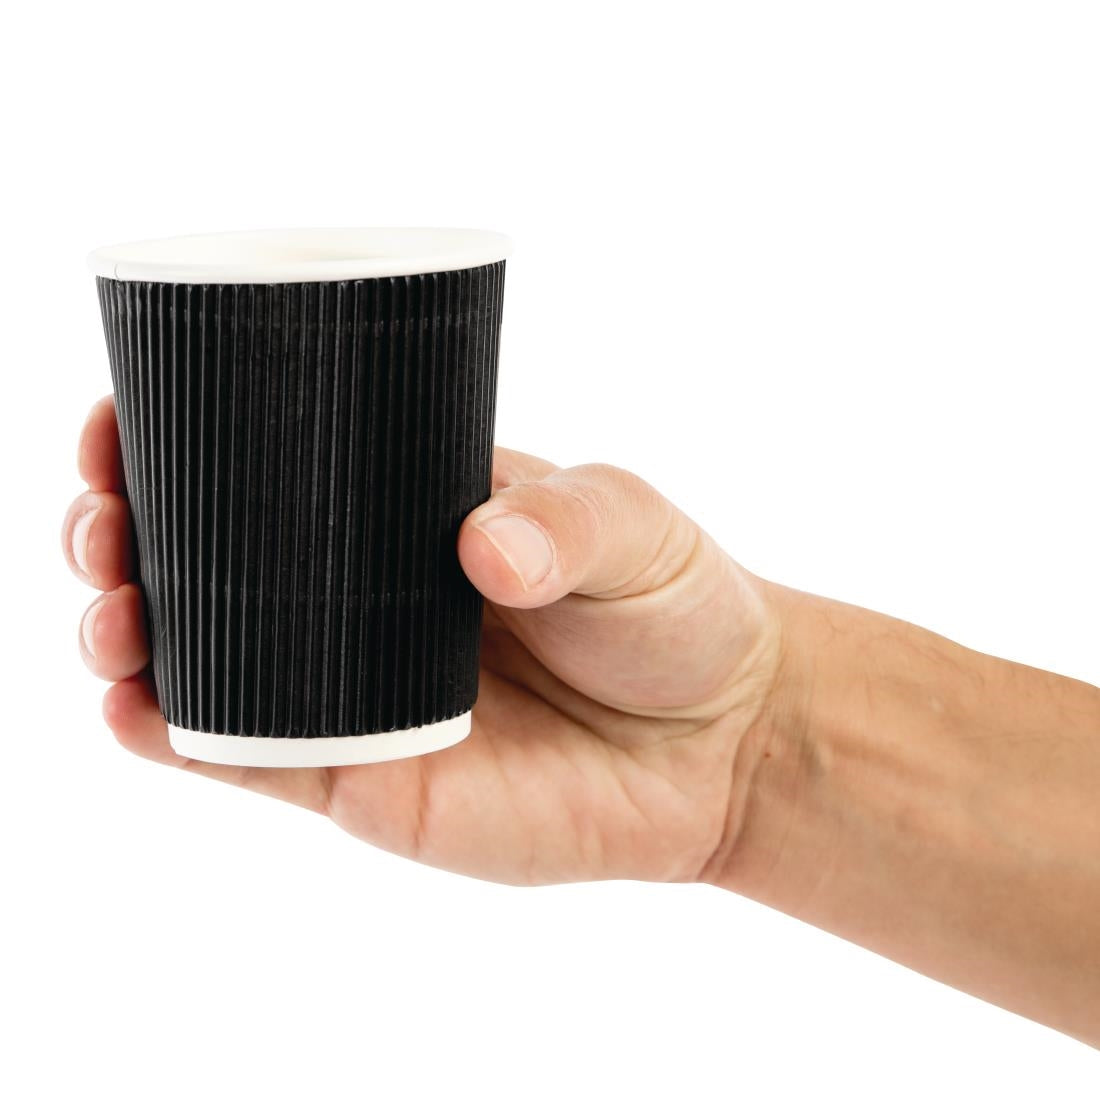 Fiesta Disposable Coffee Cups Ripple Wall Black 225ml / 8oz (Pack of 25) JD Catering Equipment Solutions Ltd